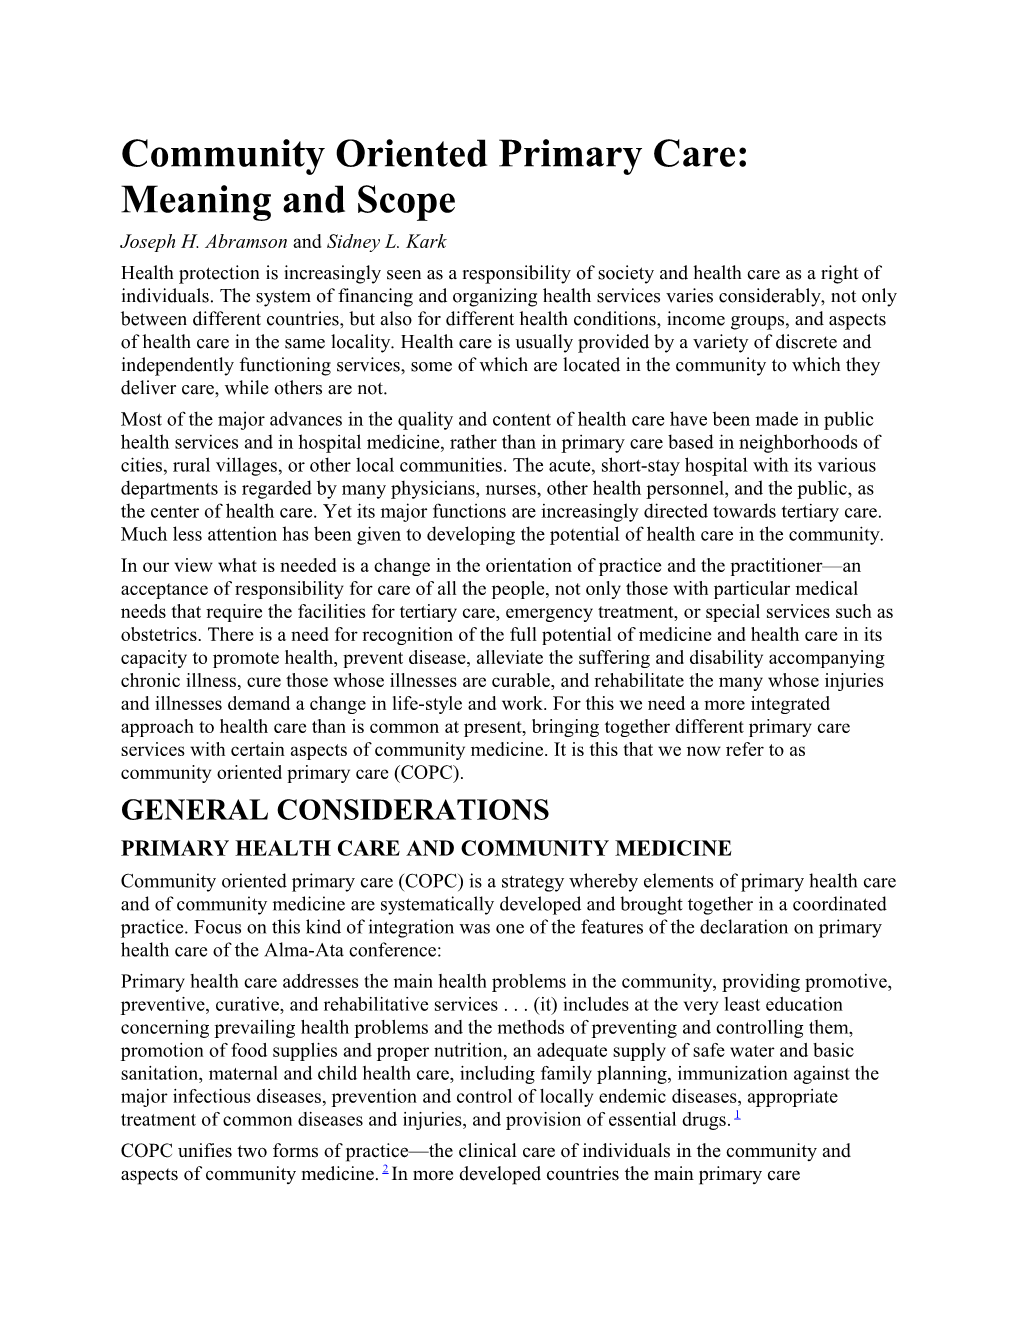 Community Oriented Primary Care: Meaning and Scope